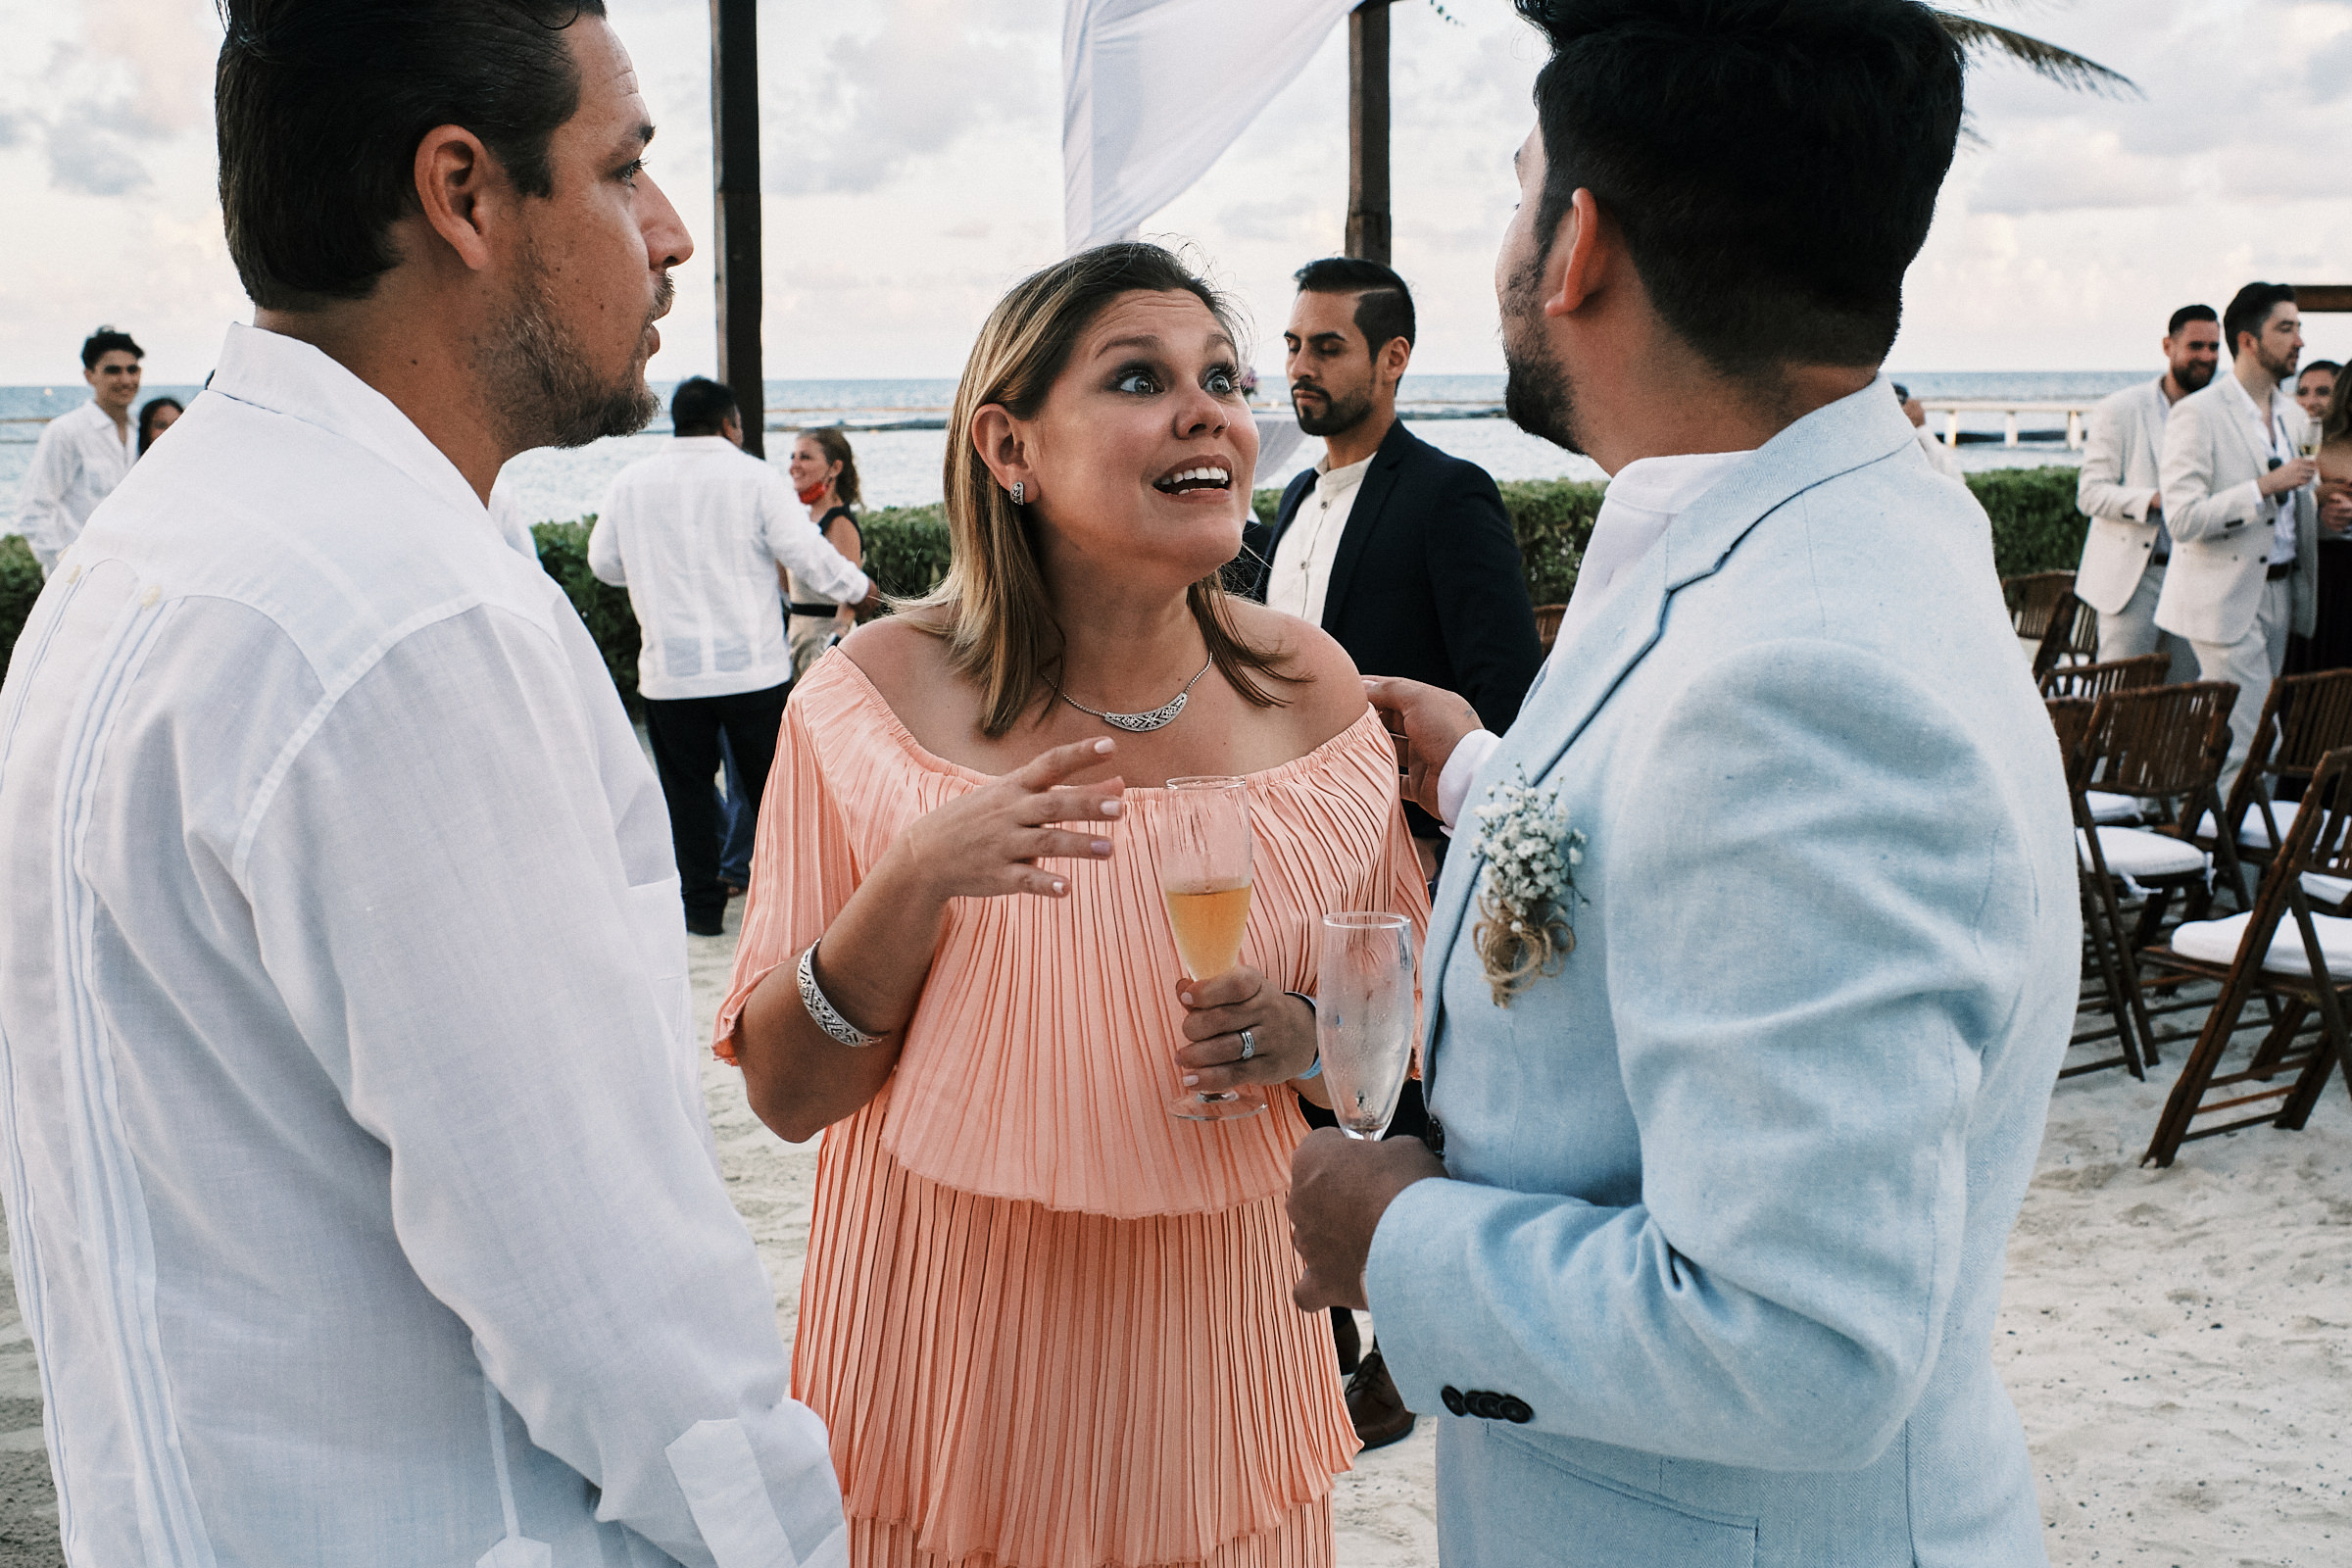 Wedding Guest Is Excited To Talk To Groom After Ceremony In Playa Del Carmen